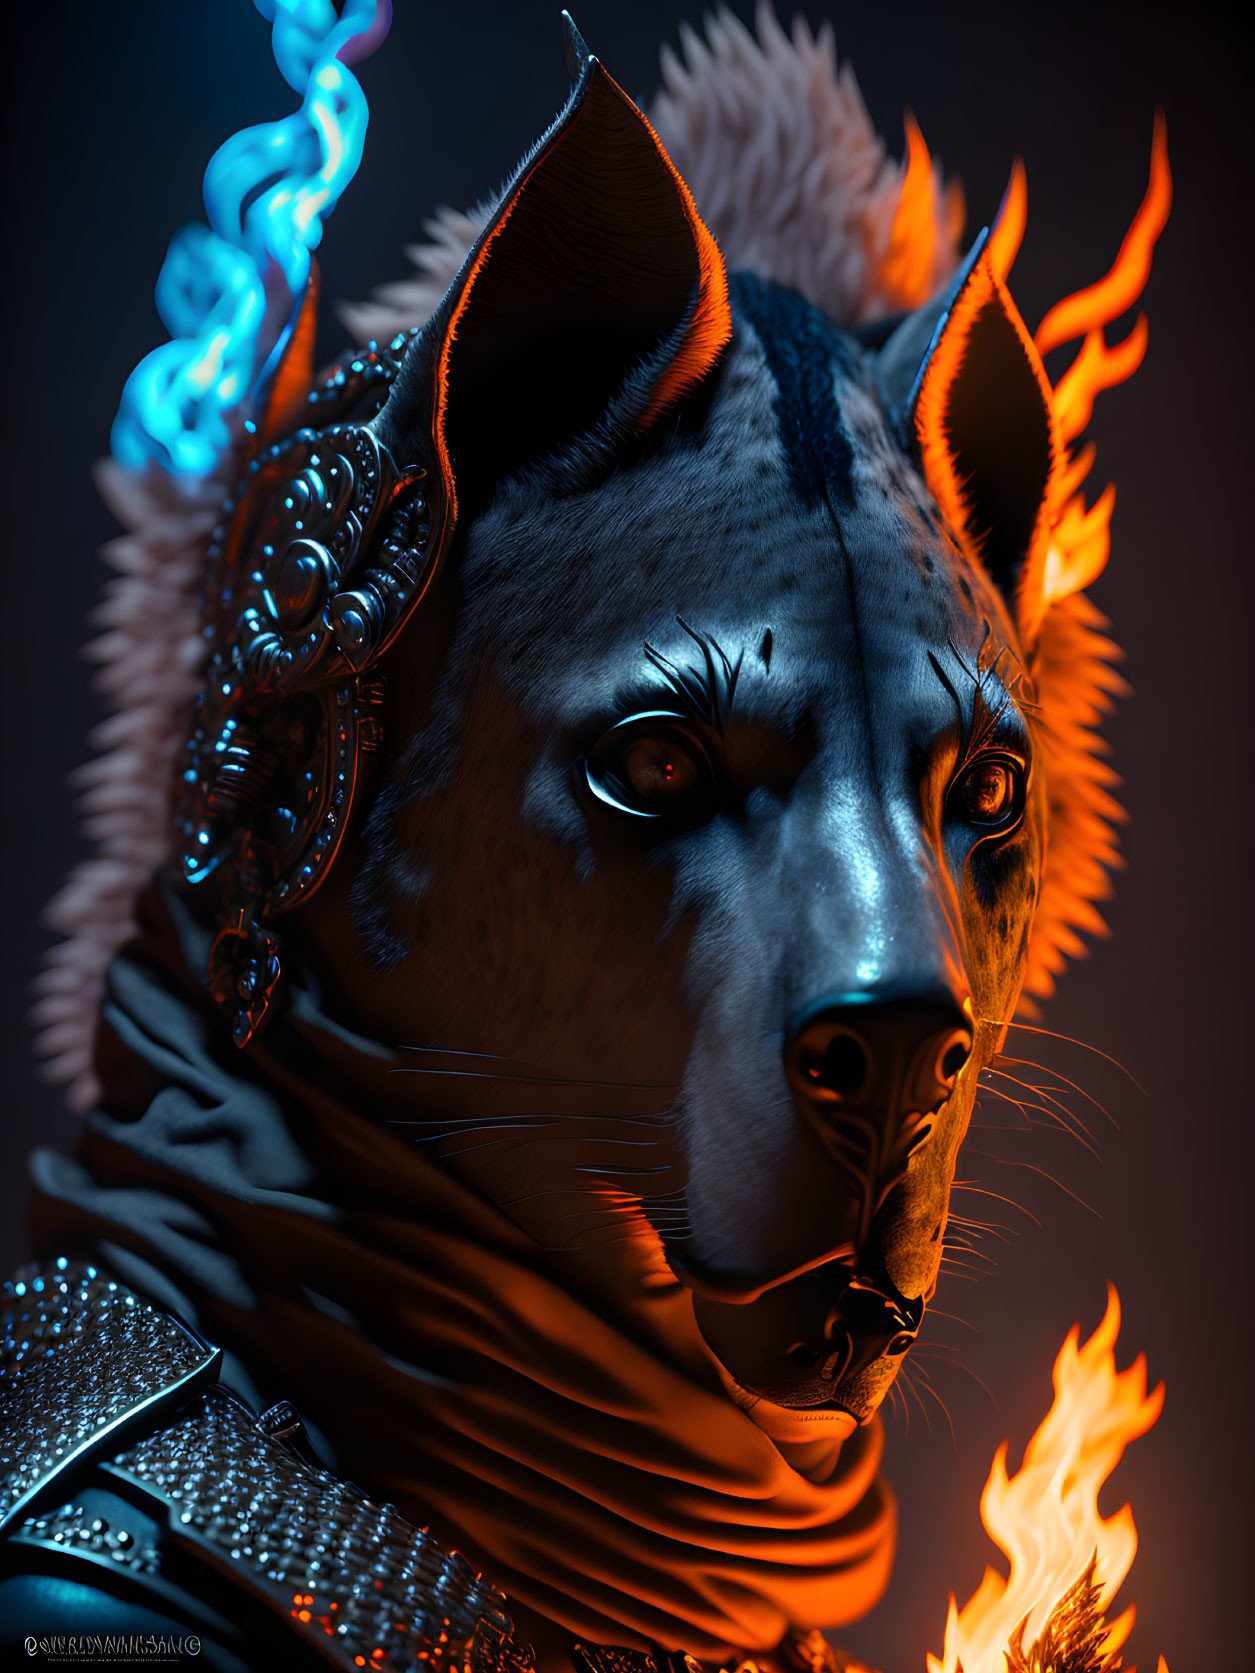 Anthropomorphic wolf digital art with glowing blue eyes and fiery surroundings